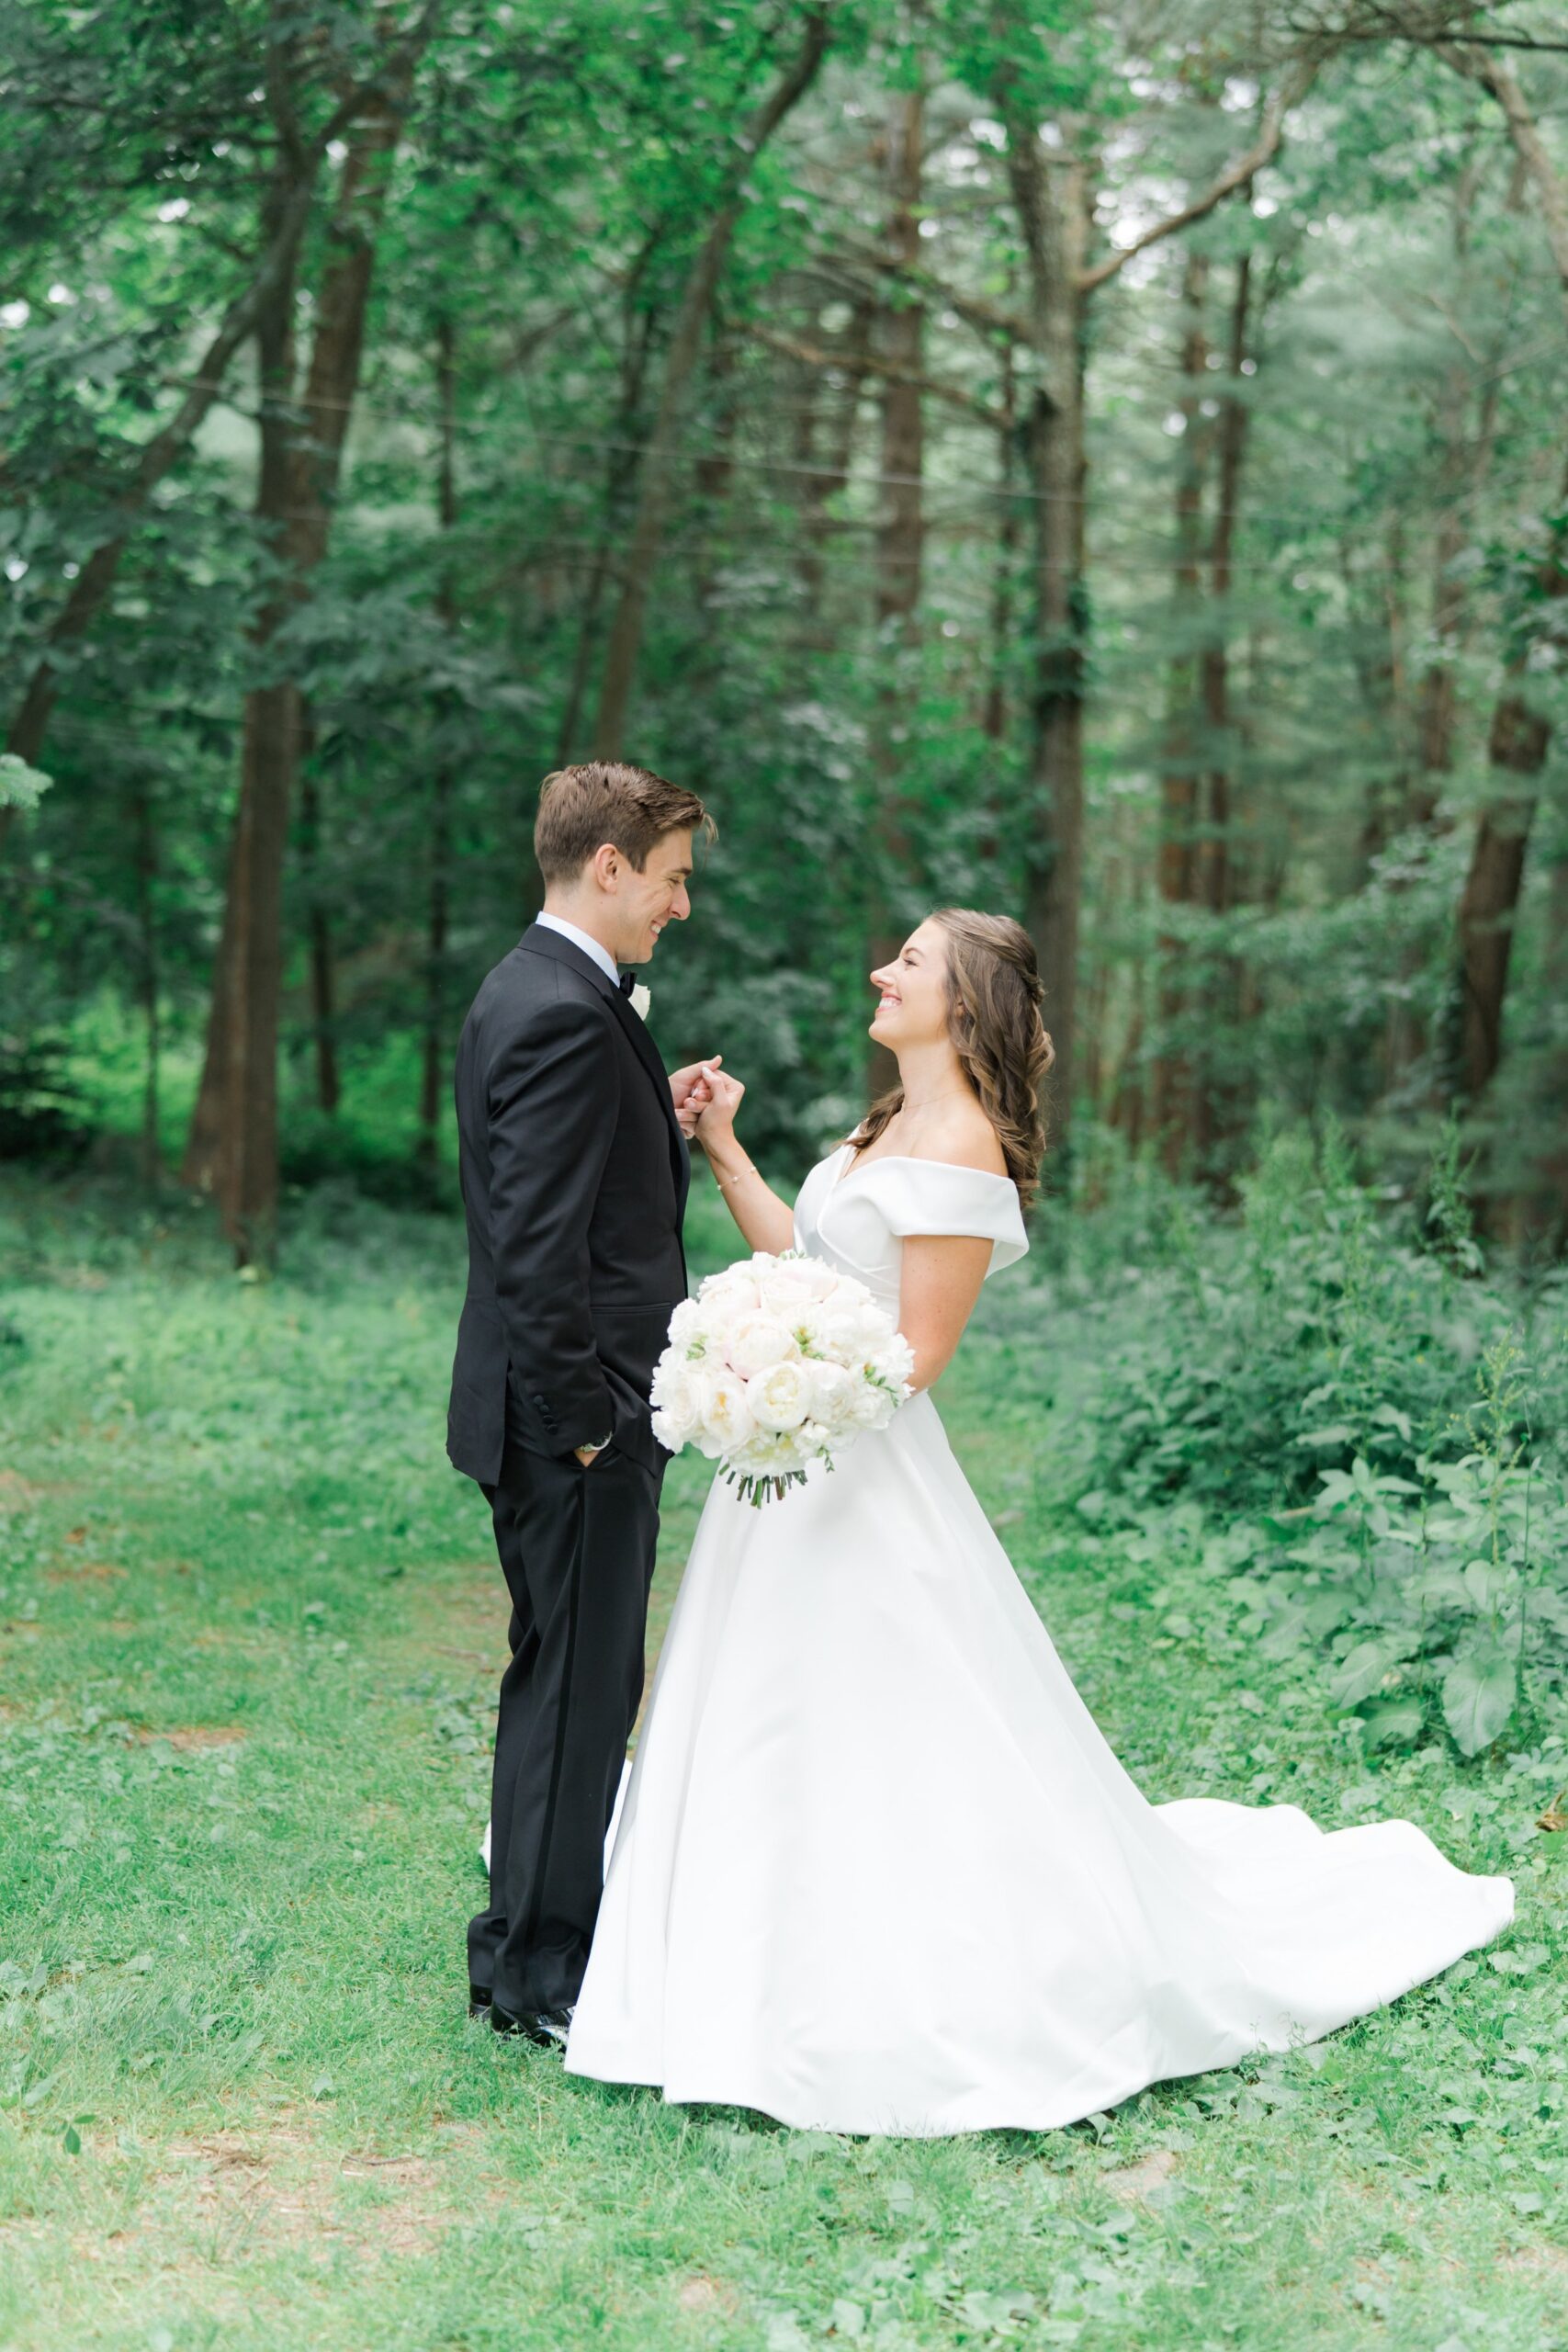 Bradley Estate Wedding. Bride and groom share cute moment during wedding day portraits.